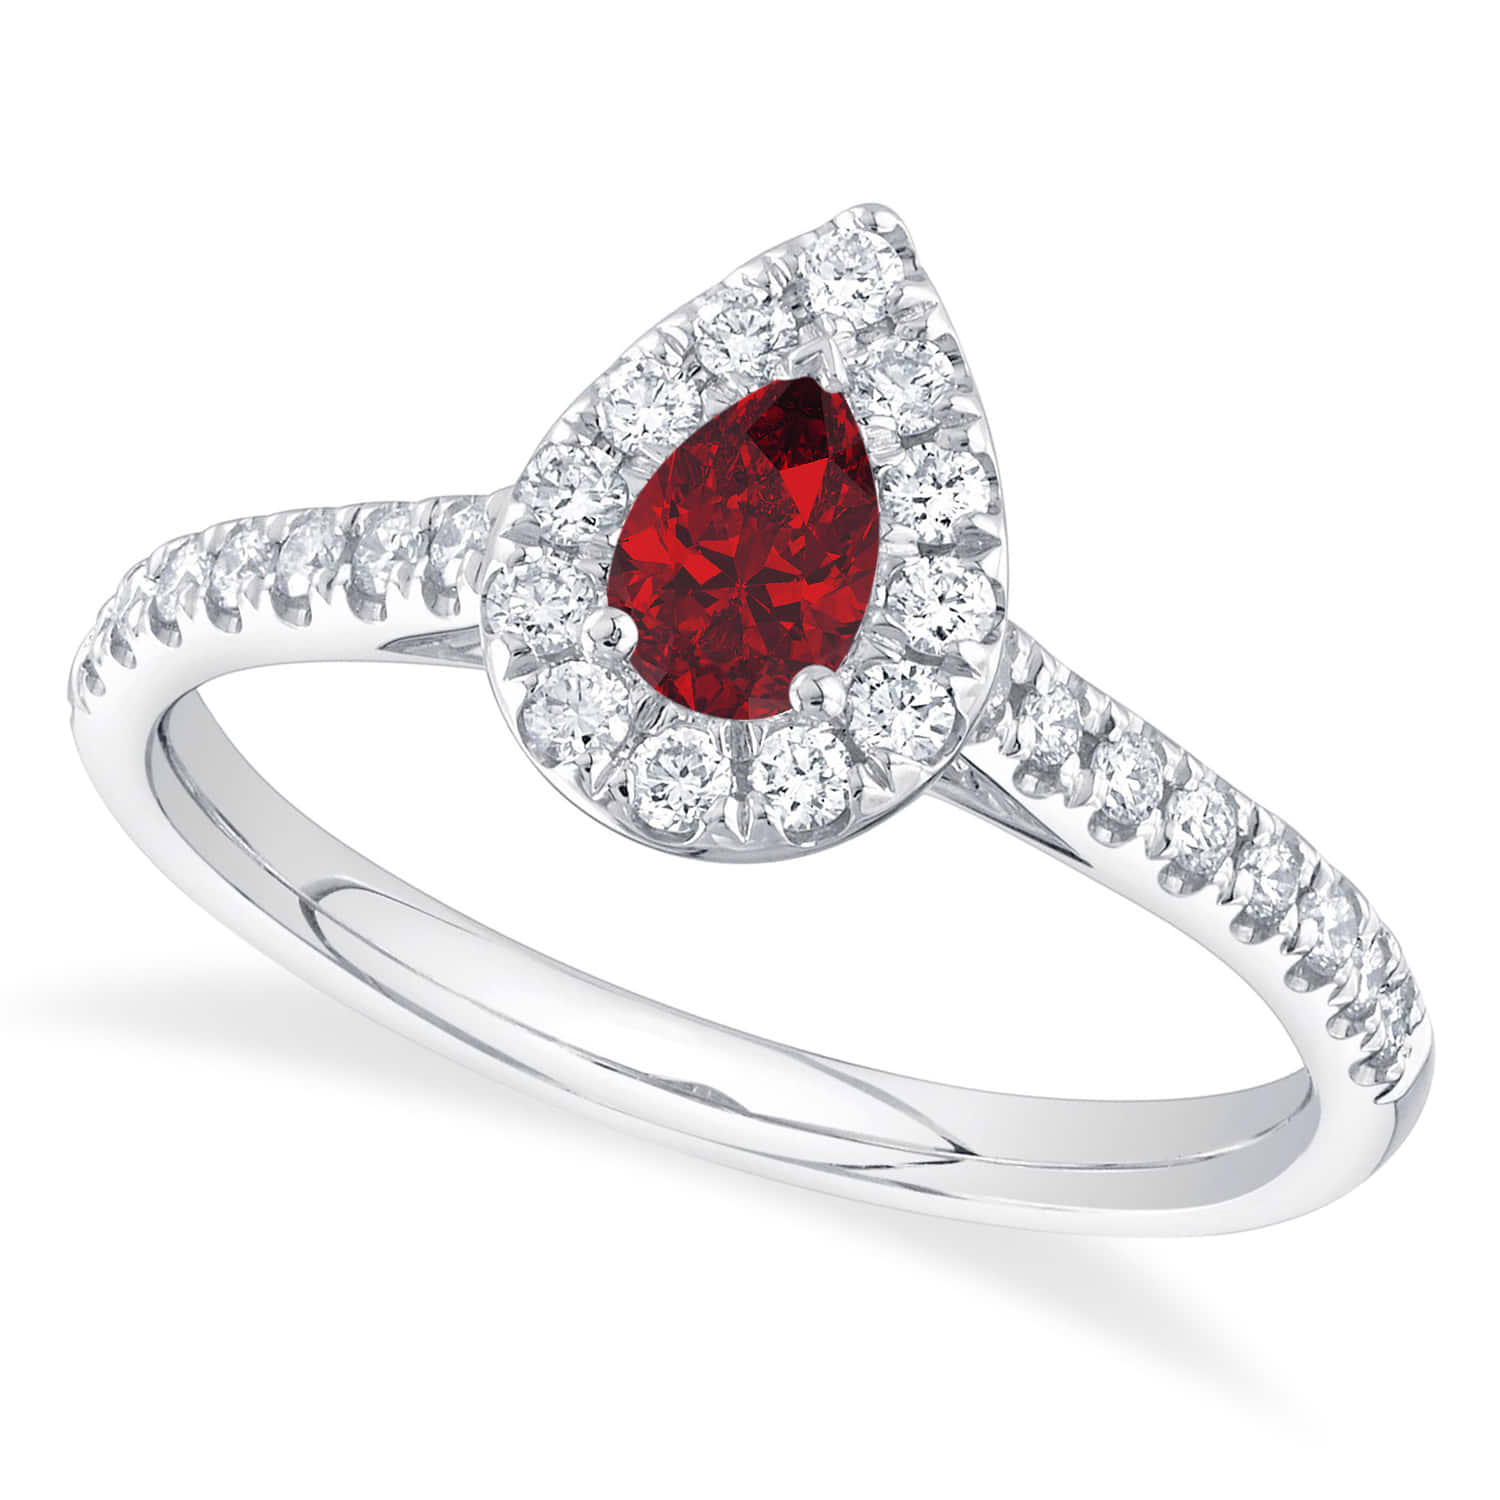 Pear Cut Ruby & Diamond Engagement Ring 14K White Gold (0.59ct)